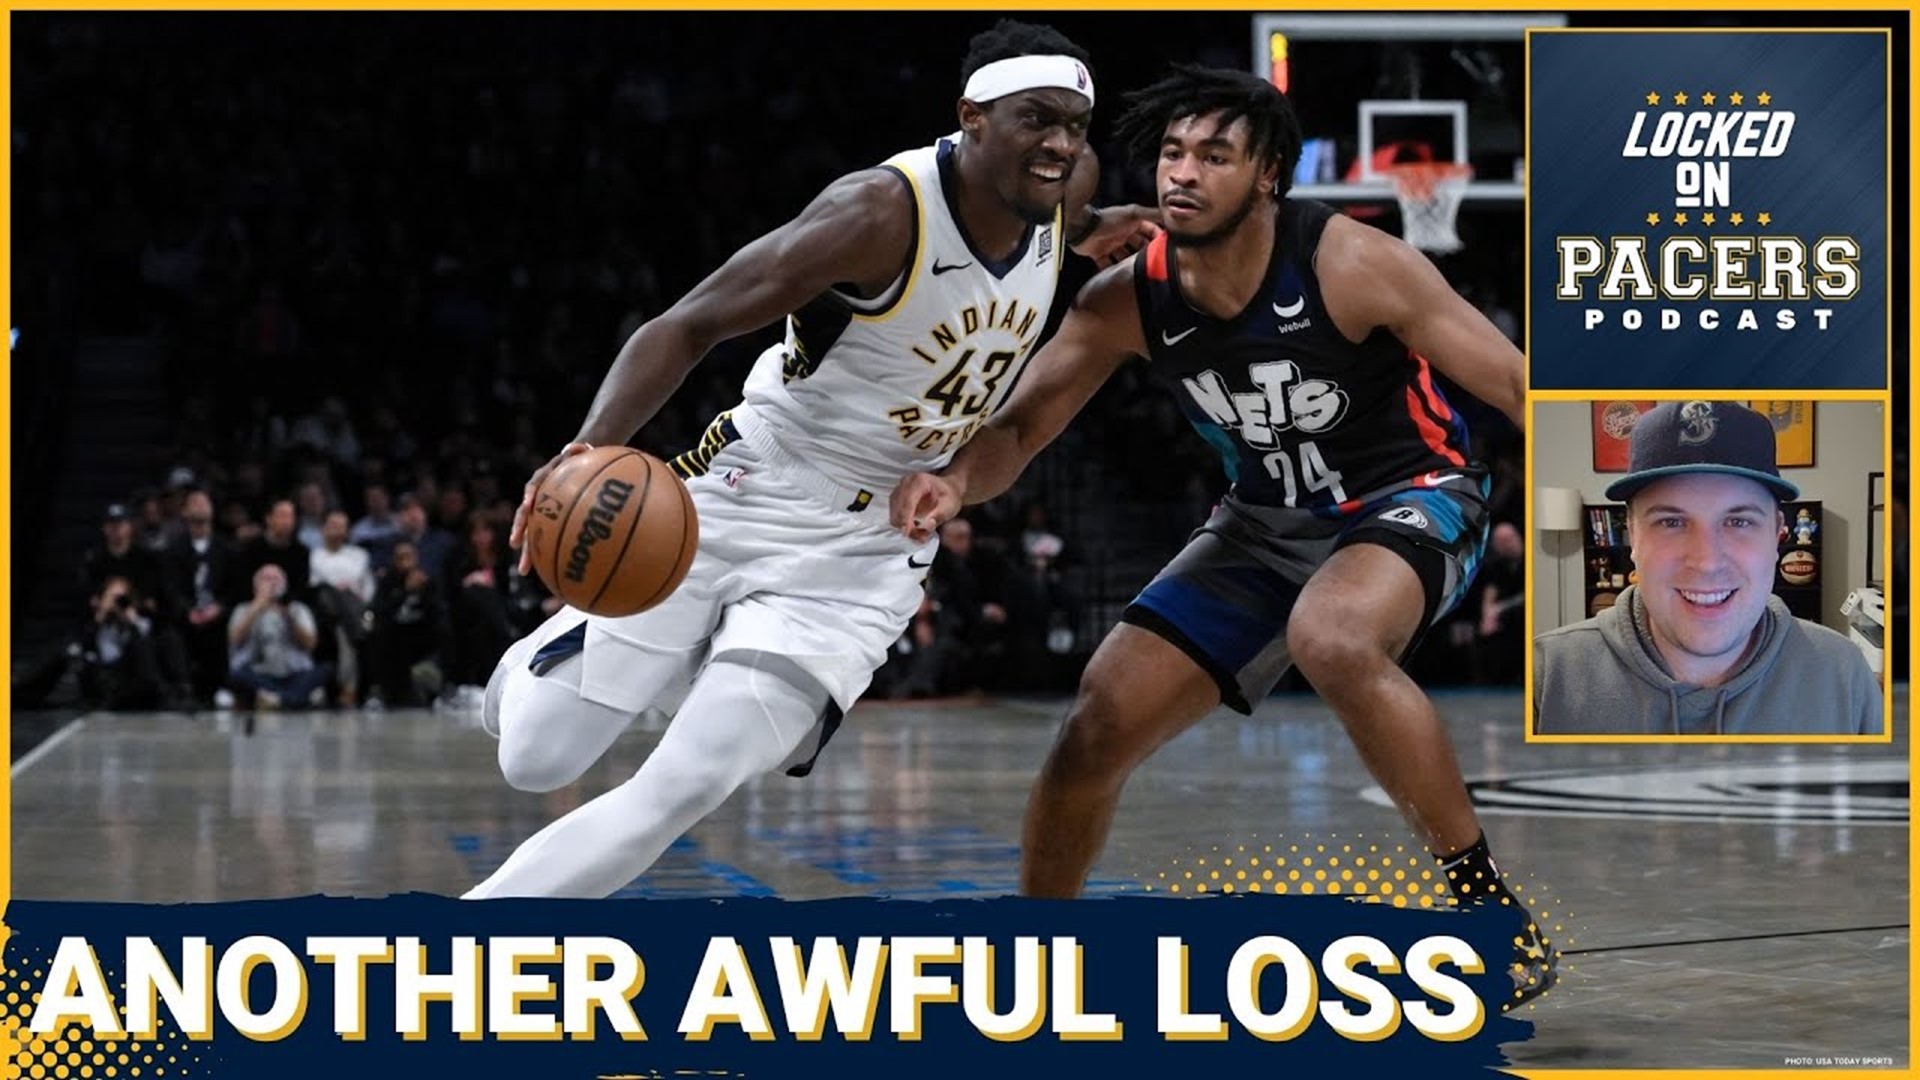 Indiana Pacers blow another game. How they fell short in clutch vs Brooklyn Nets + Standings watch